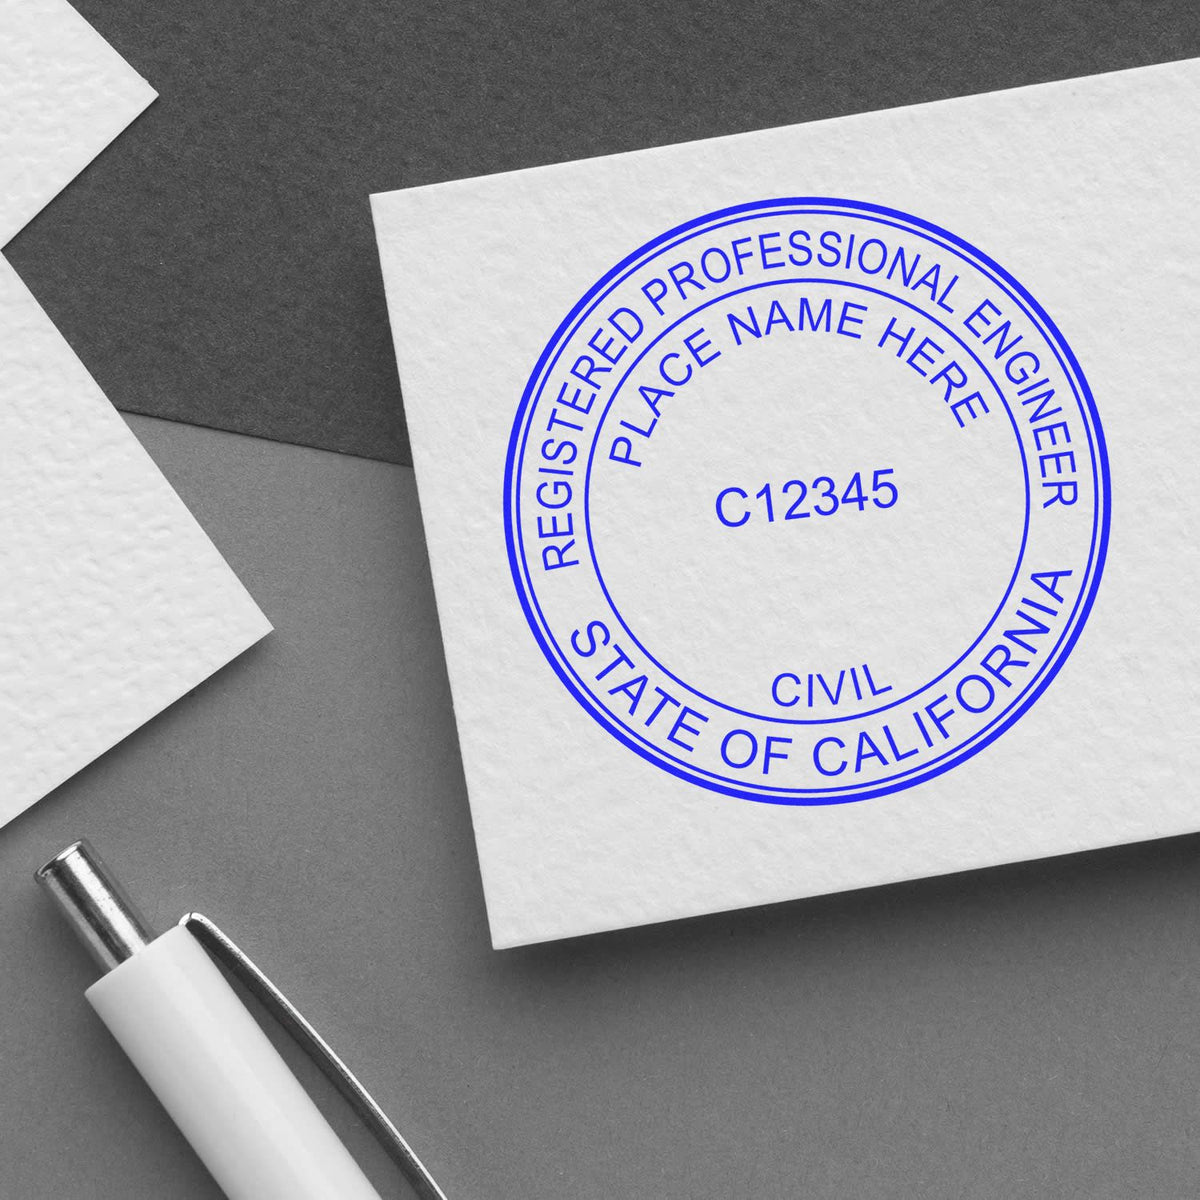 The Digital California PE Stamp and Electronic Seal for California Engineer stamp impression comes to life with a crisp, detailed photo on paper - showcasing true professional quality.